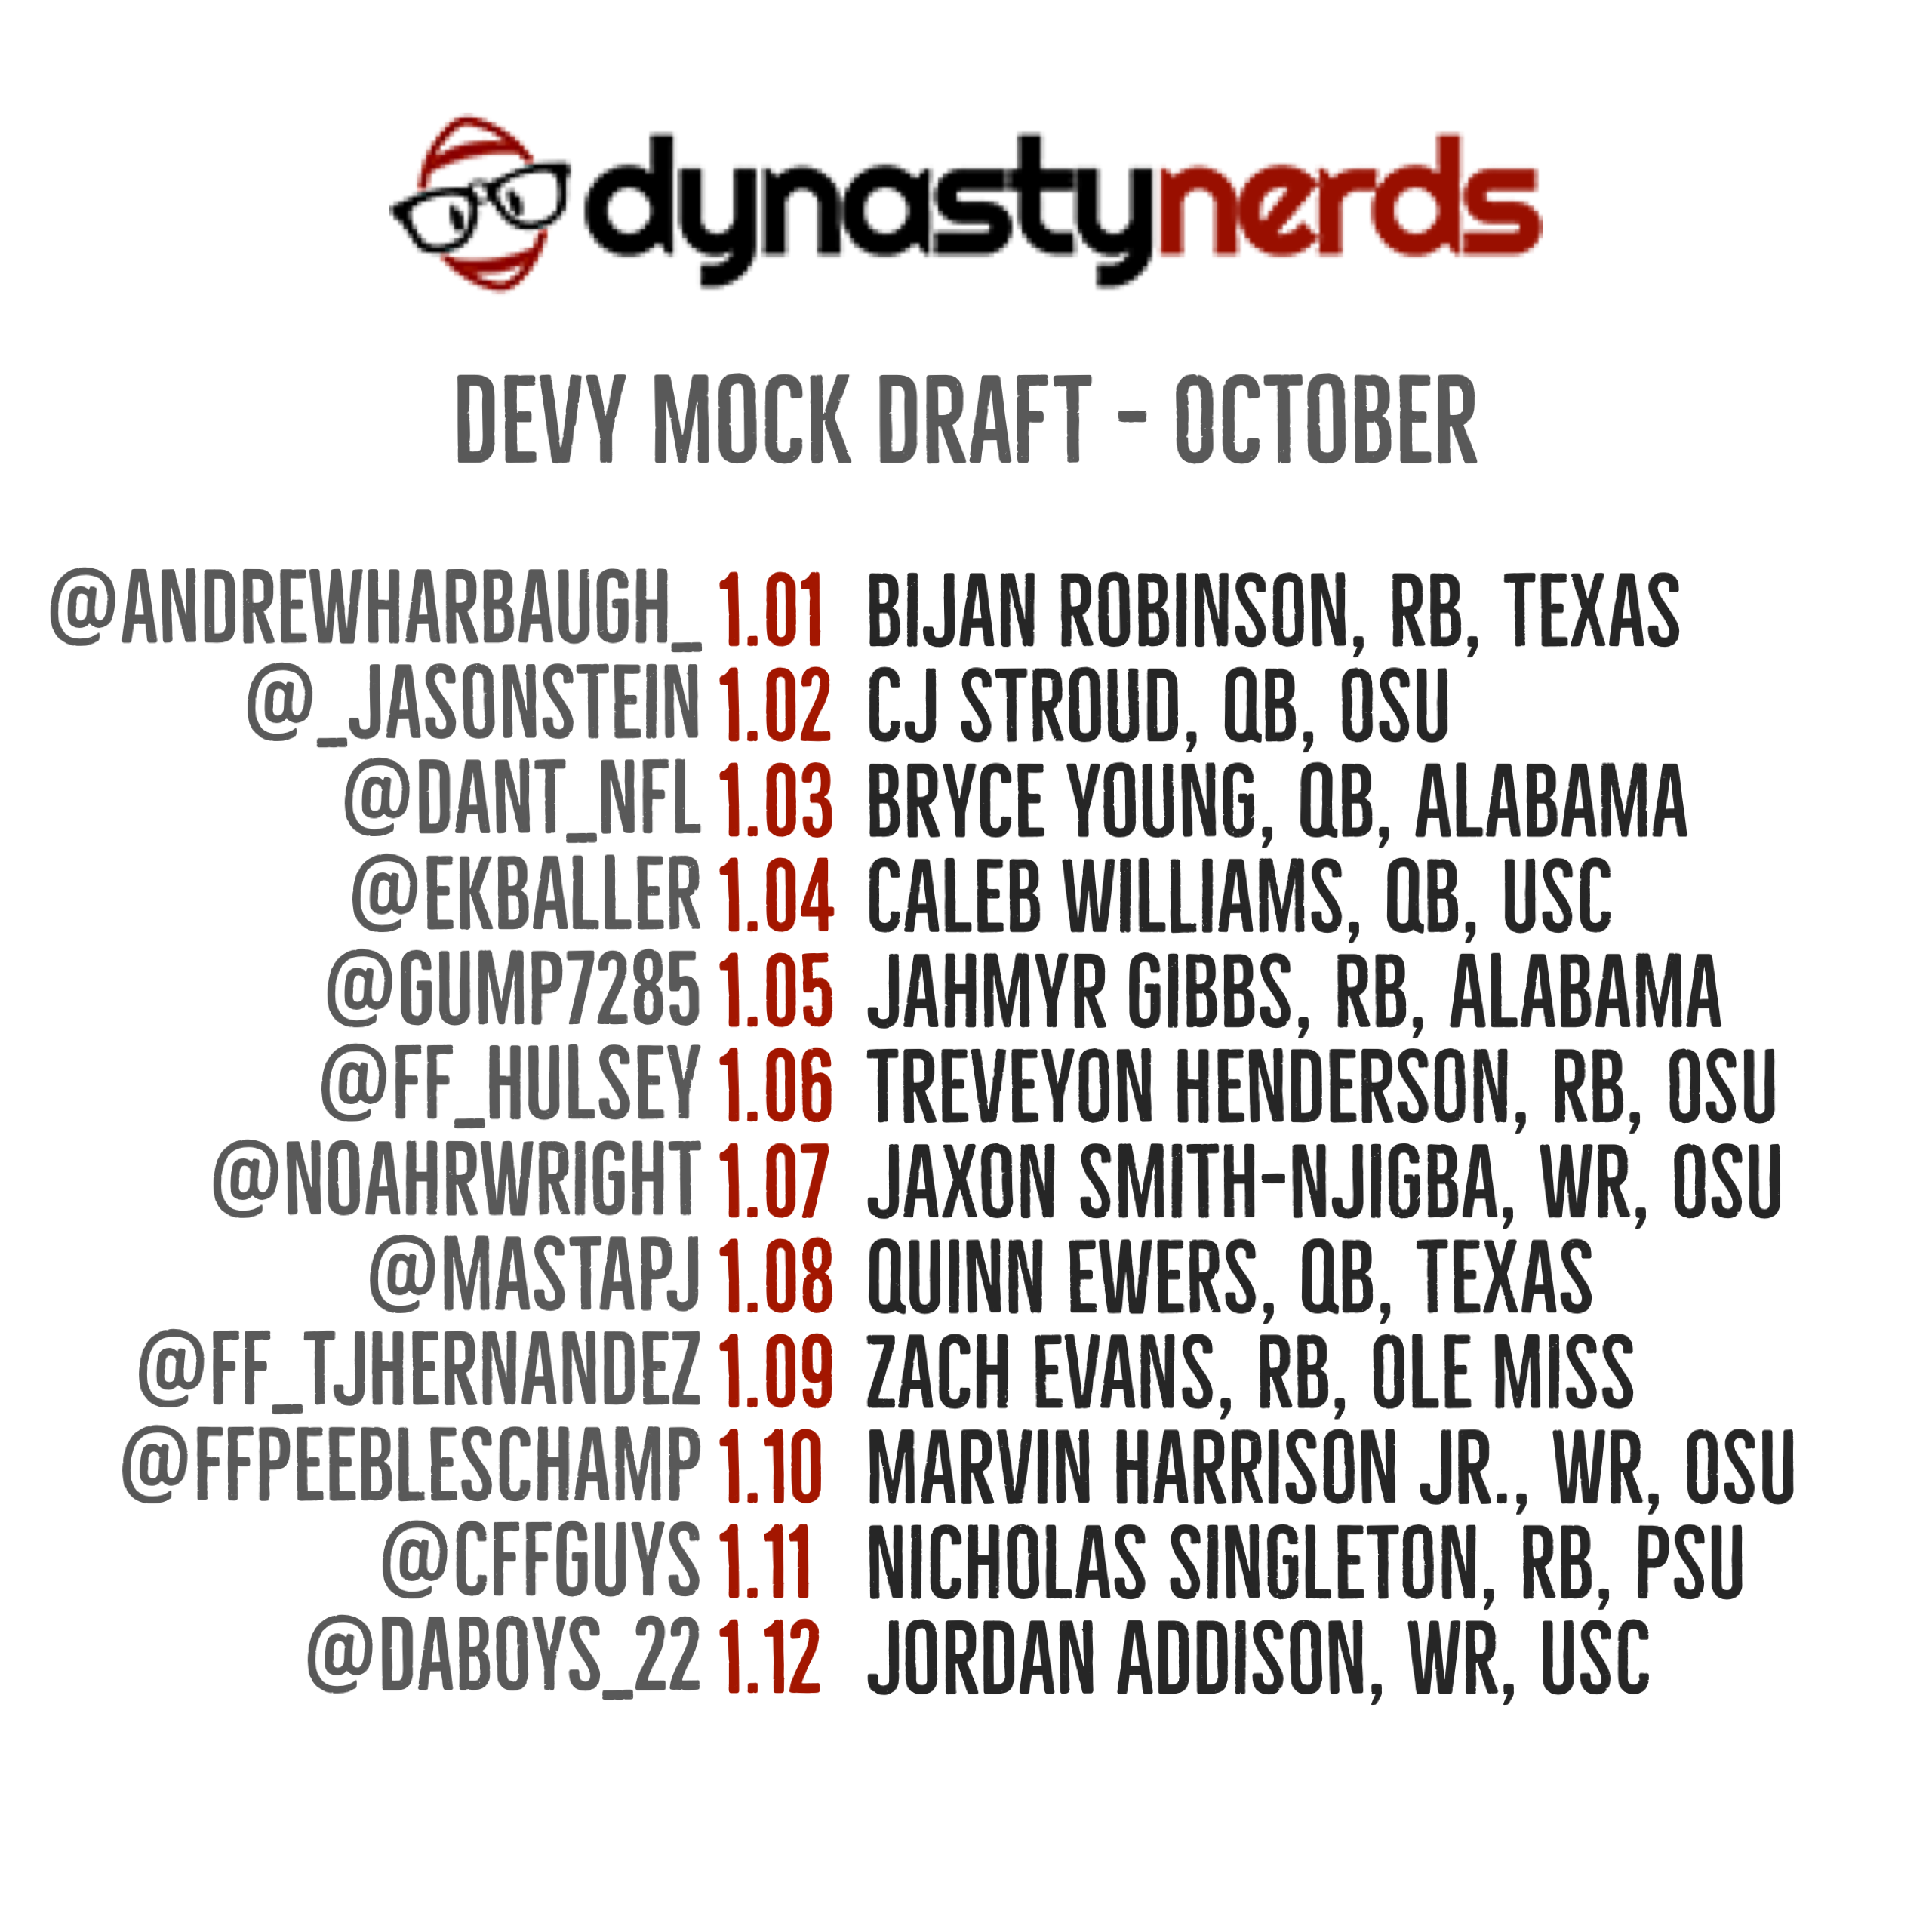 2022 dynasty rookie mock draft: Non-PPR mock draft from the No. 6 spot